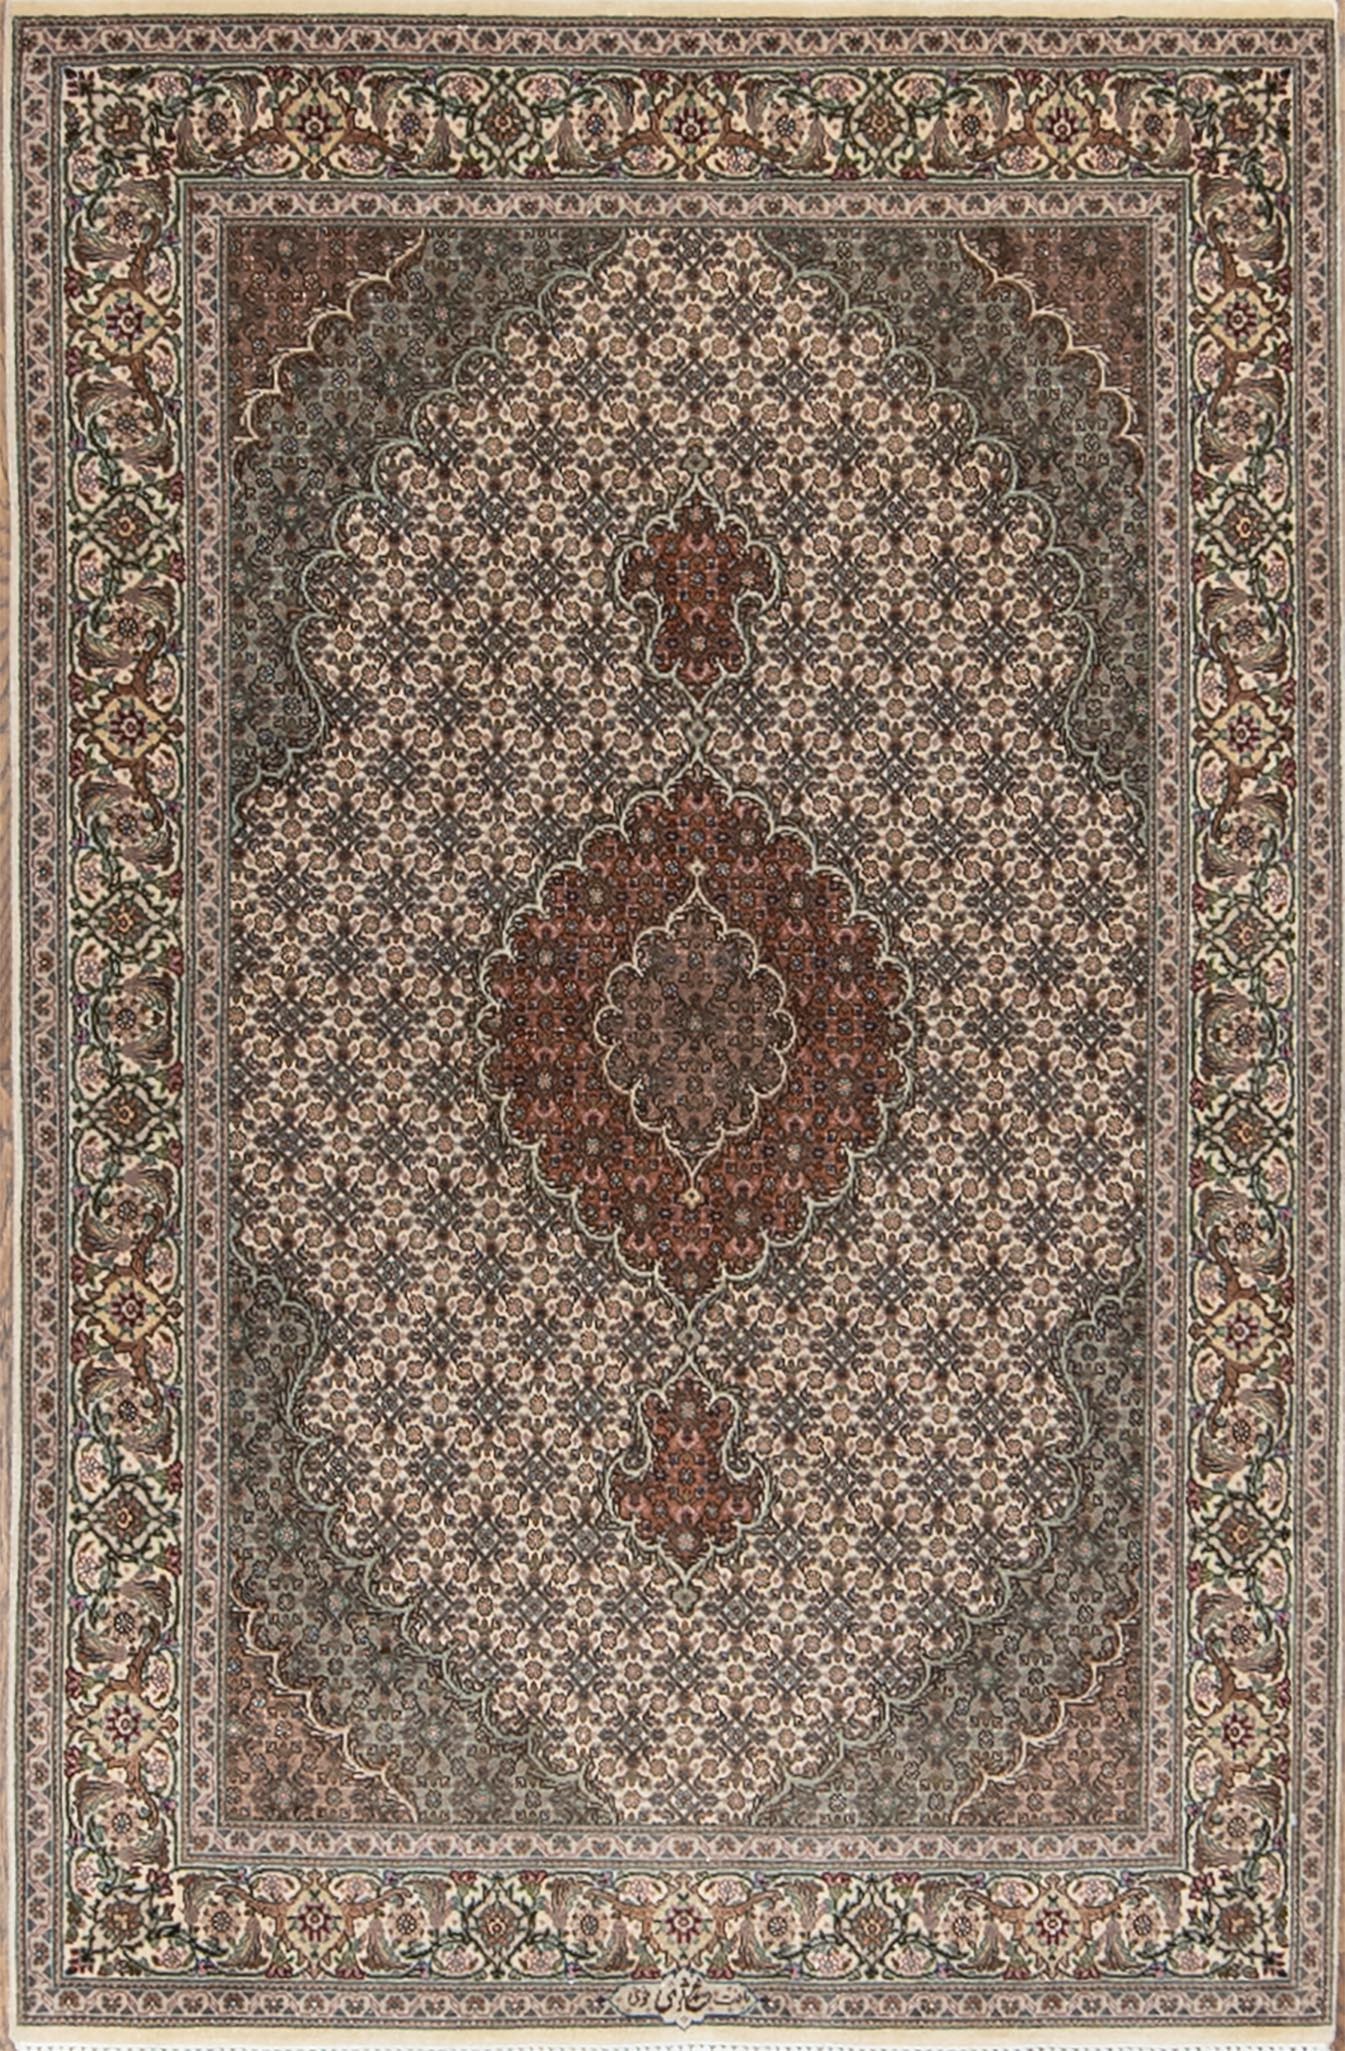 A classic design wool and silk handmade Persian carpet in beige and green colors. Size 3.5x5.3.